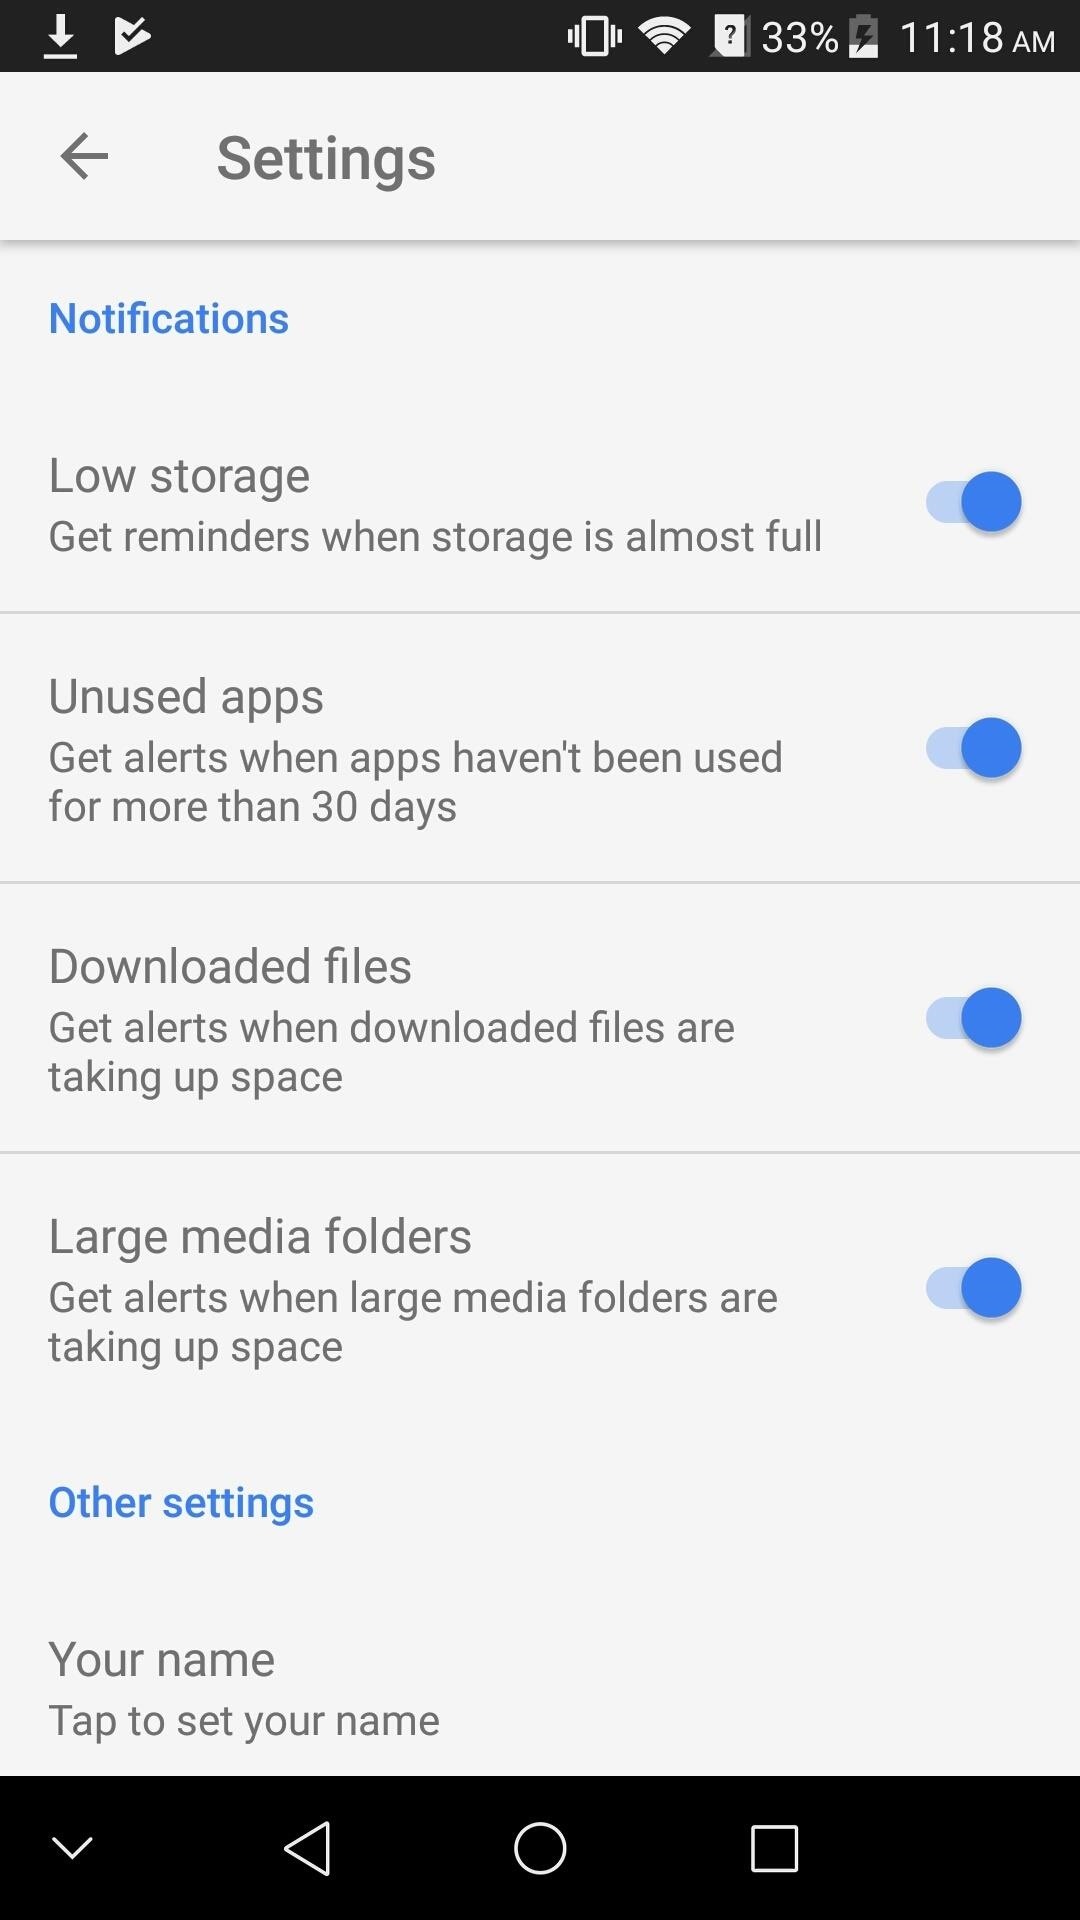 Google Launches Public Beta of 'Files Go' After New File Management App Leaks Online